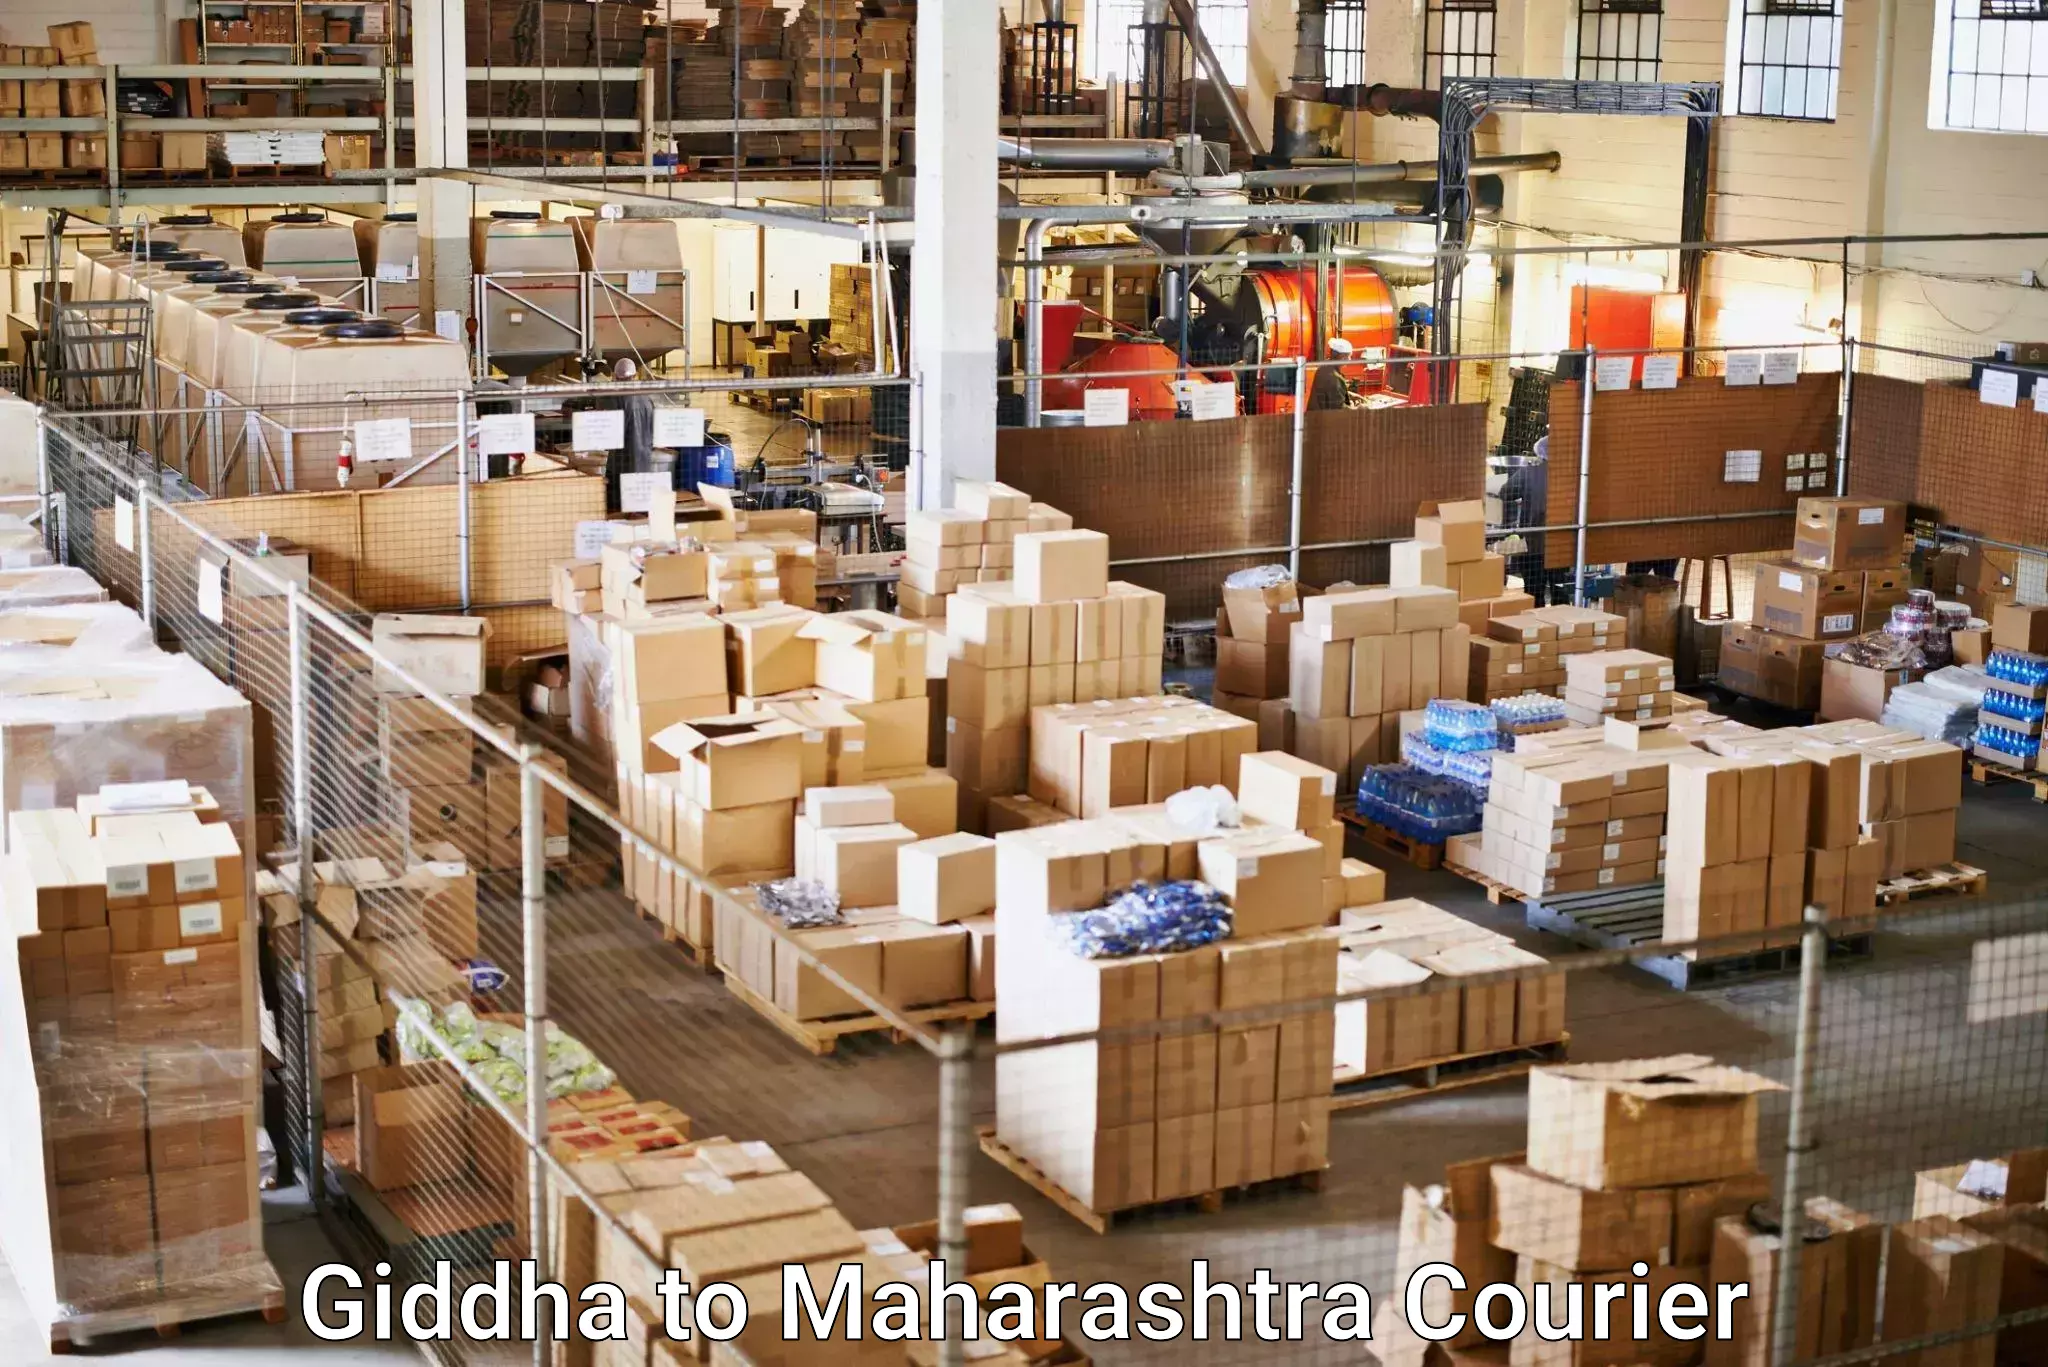 Secure freight services in Giddha to Nanded